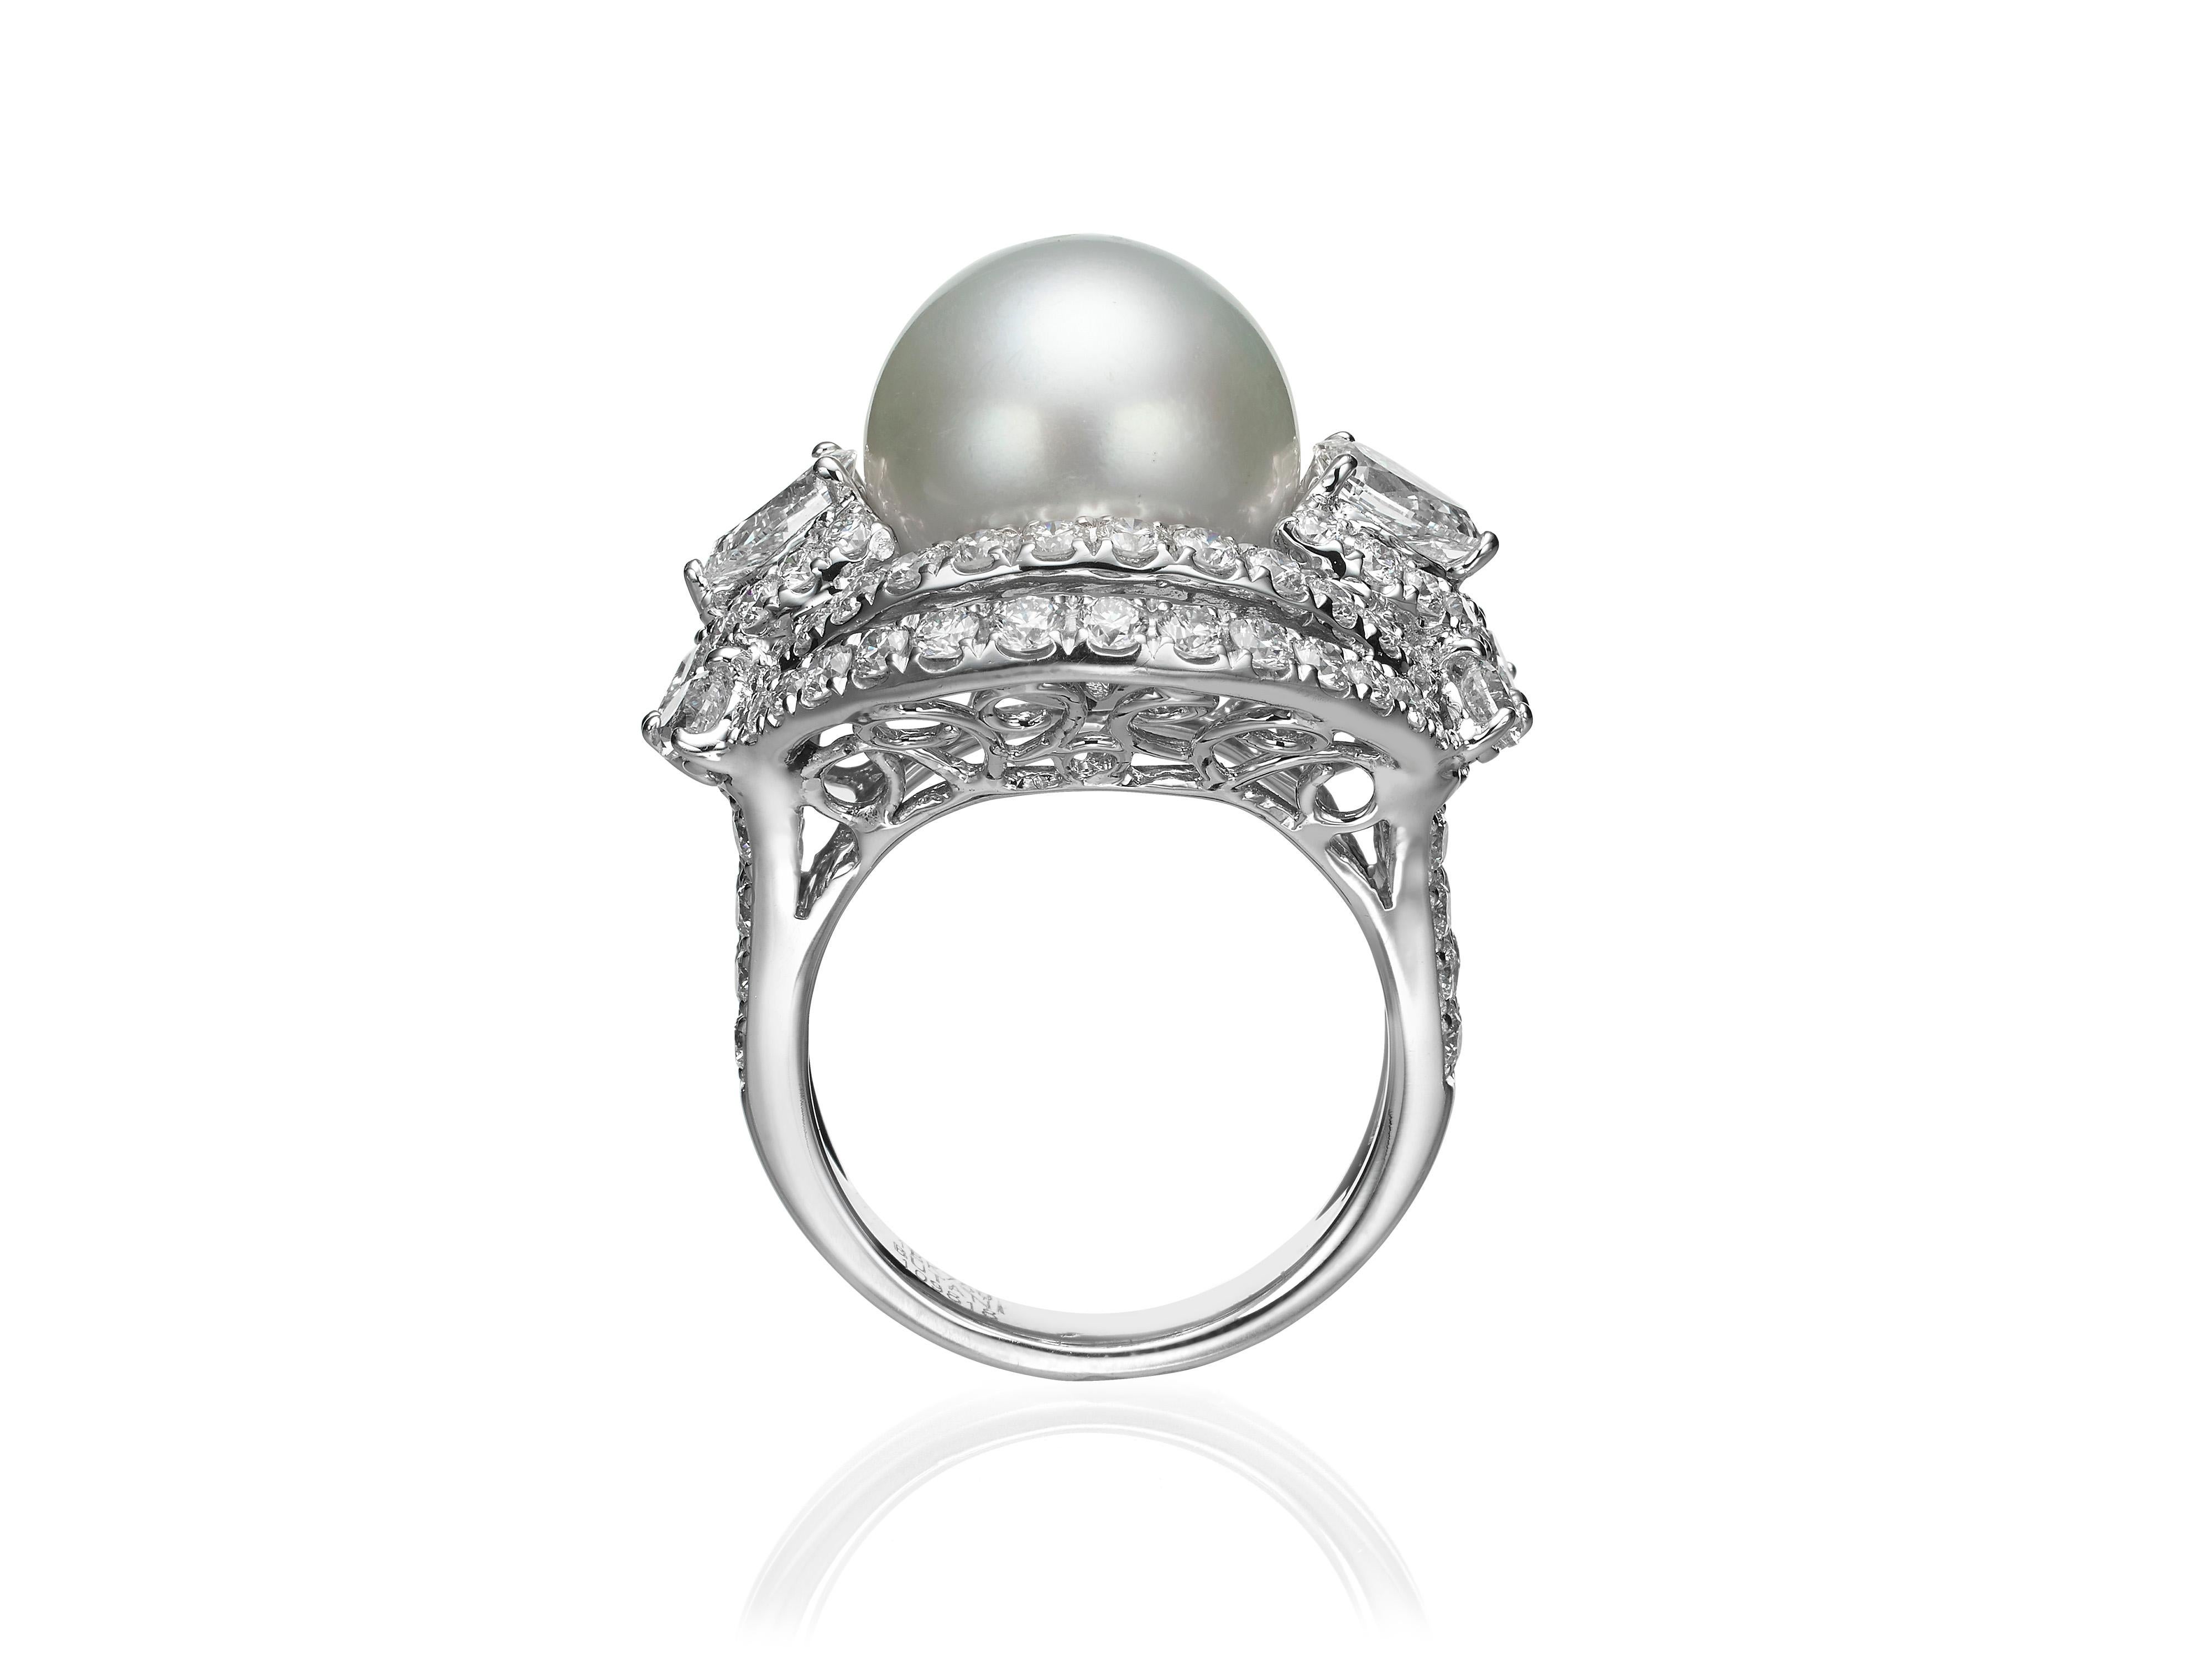 Butani's Diamond and South Sea Pearl Cocktail Ring features a sizeable 13mm South Sea Pearl at the center framed by 3.45 carats of glistening white diamonds in an 18K white gold setting.  Currently a ring size US 7.  For other sizes, please contact